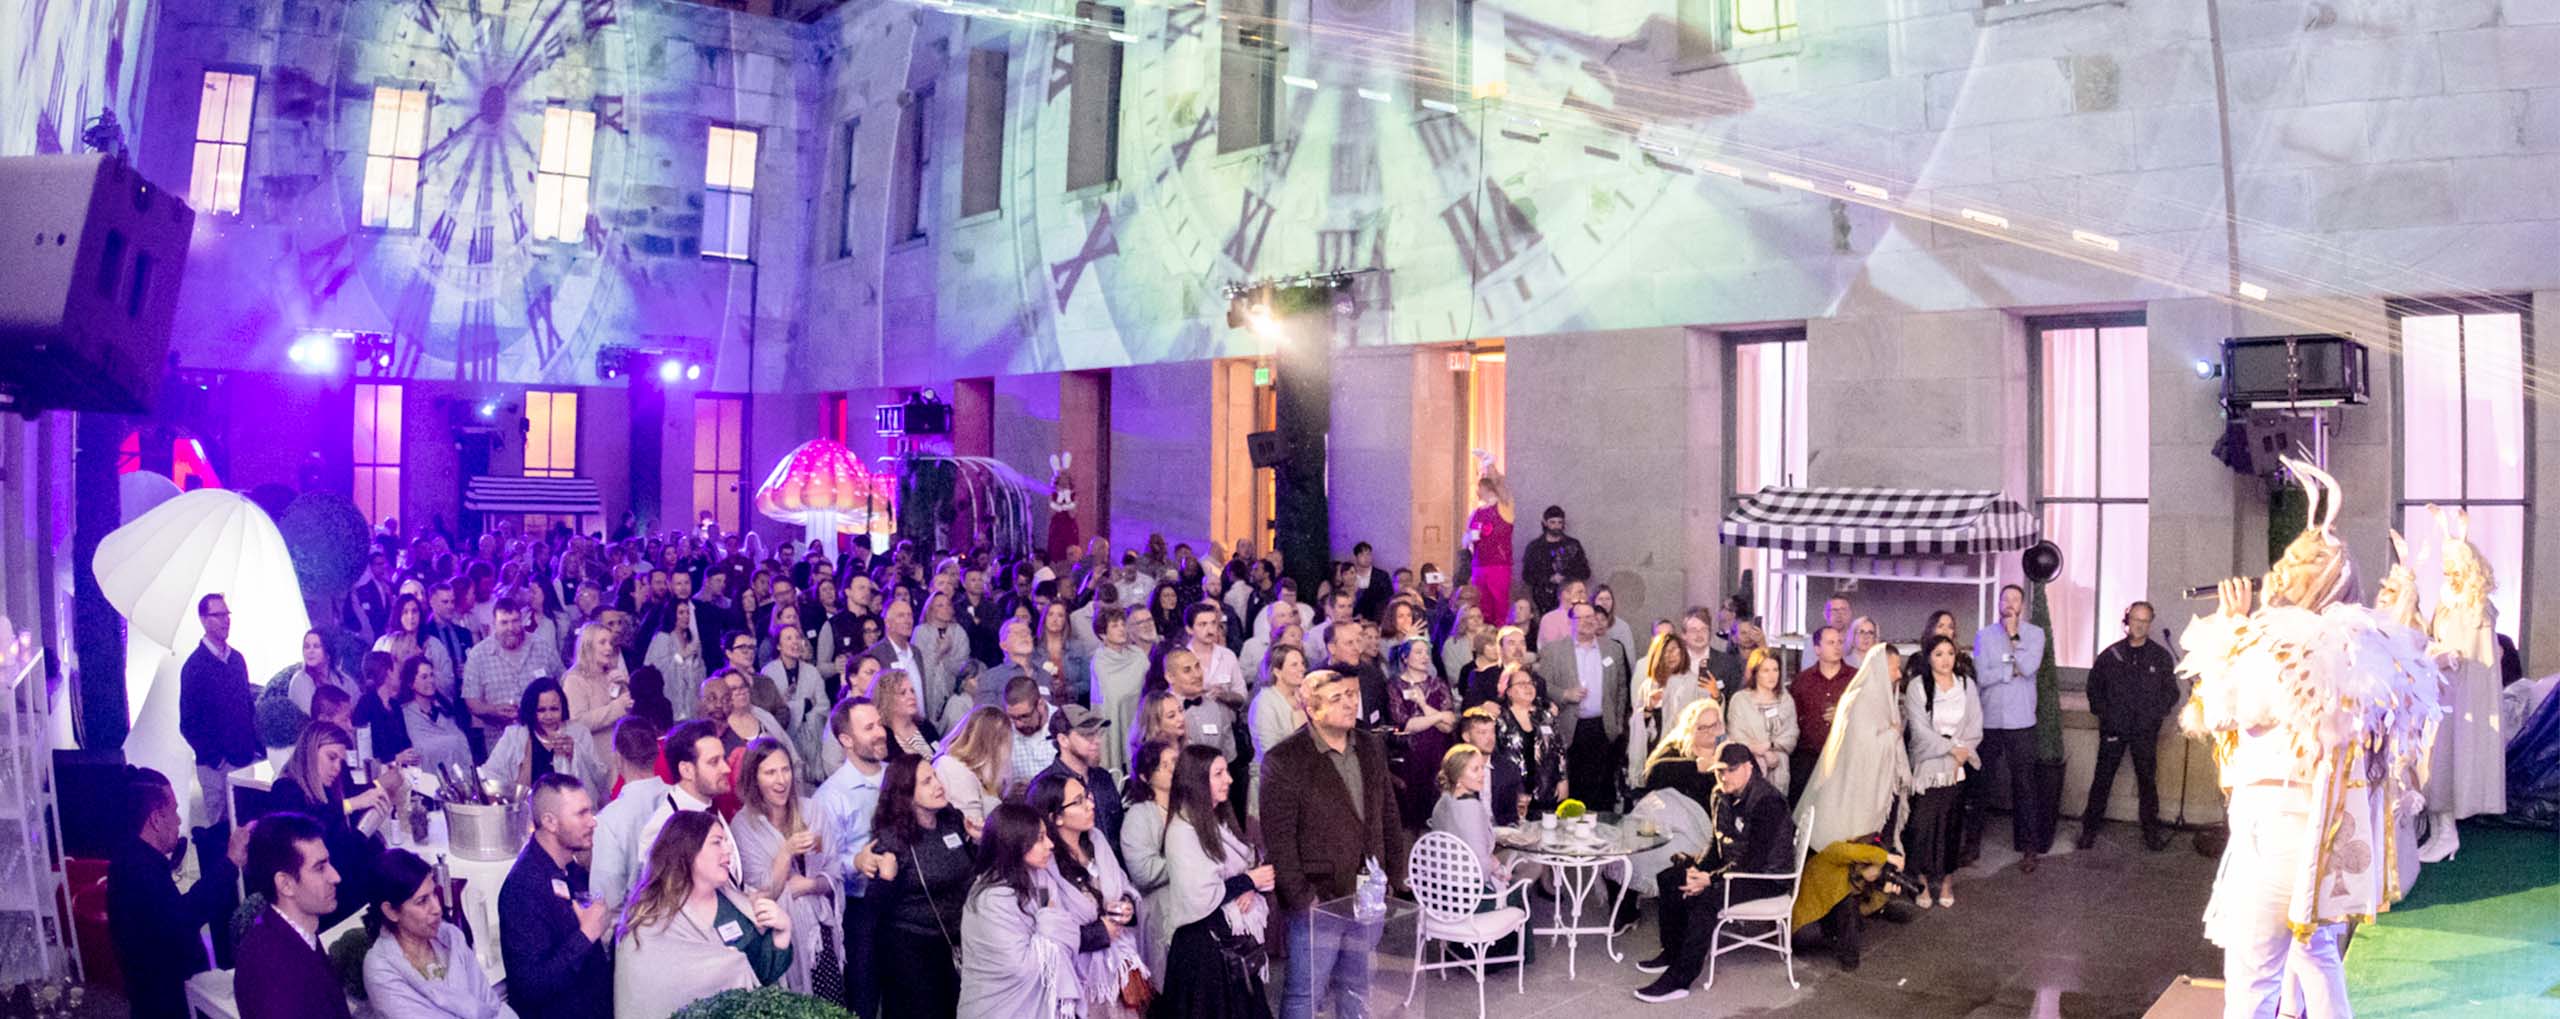 San Francisco The Mint Exterior Courtyard Event Crowd Night